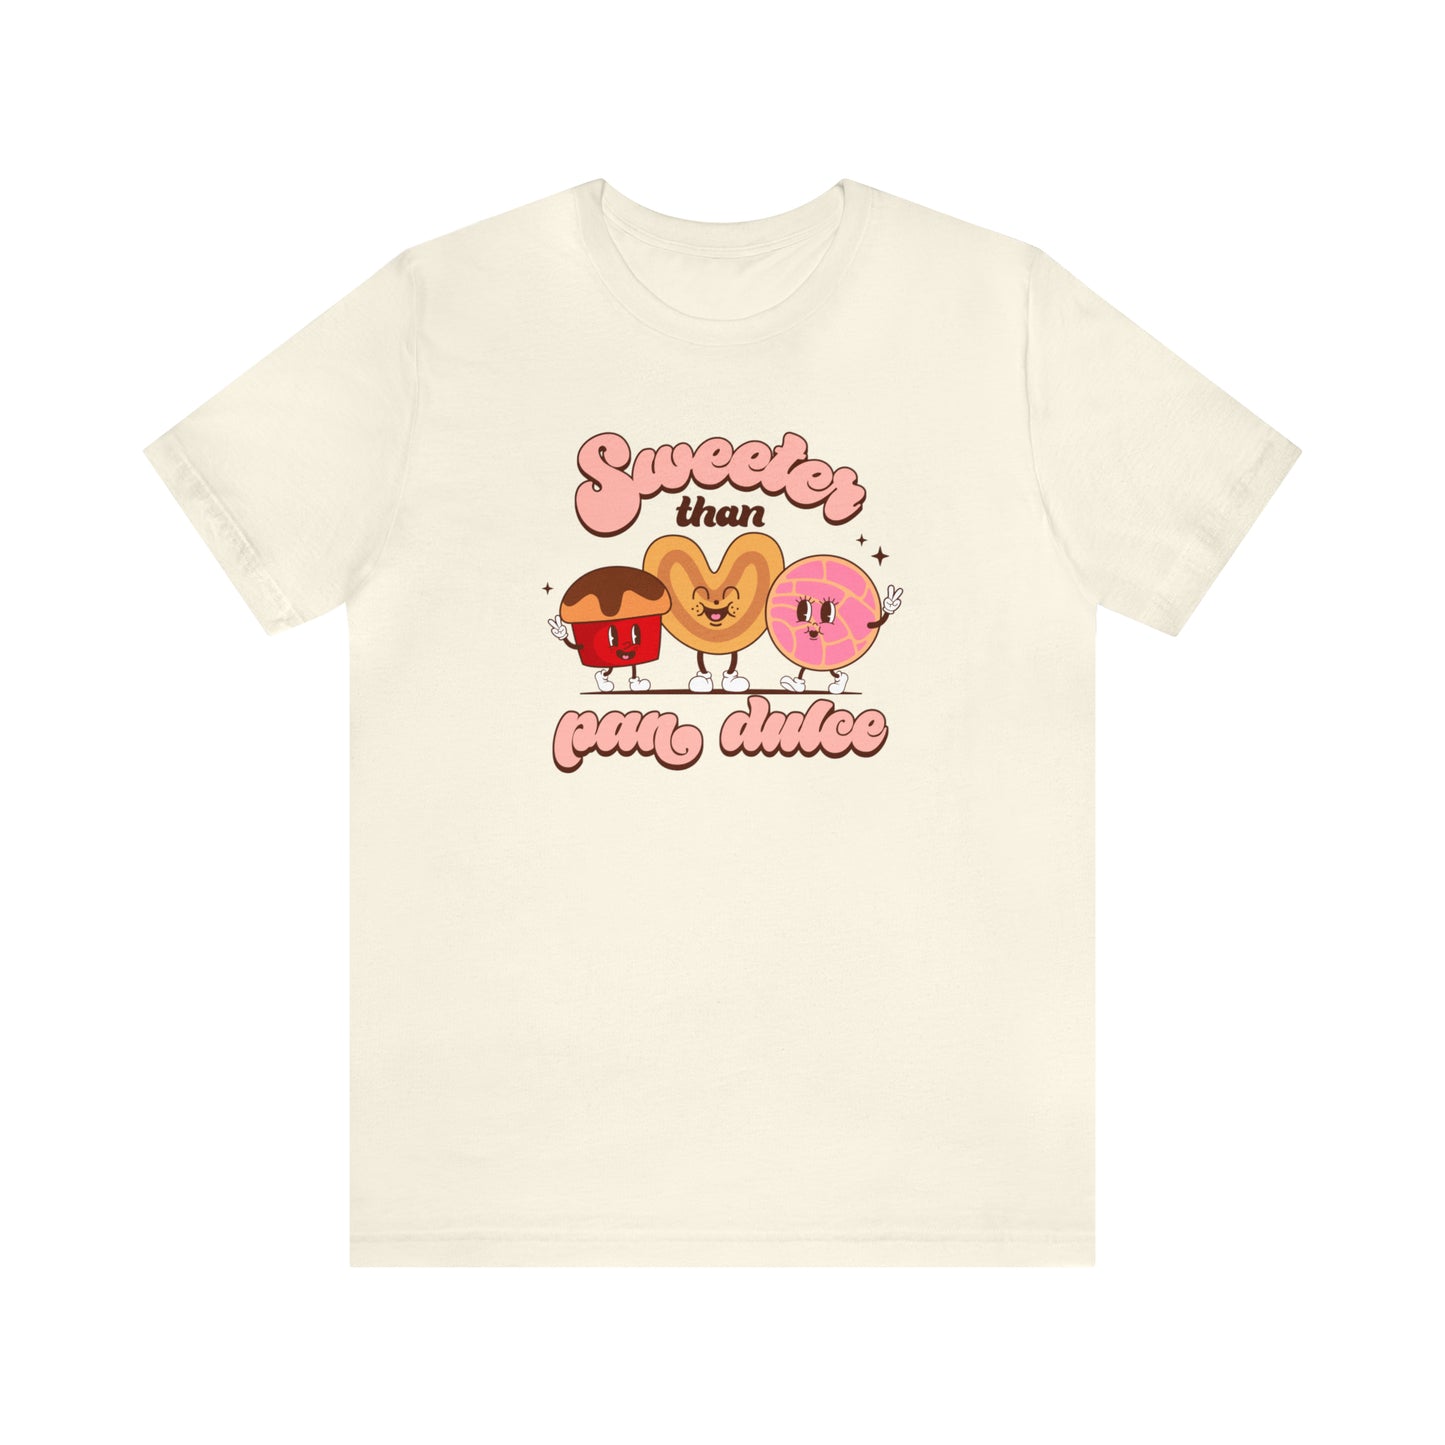 Sweeter than pan dulce shirt for Latin friend or Mexican family.